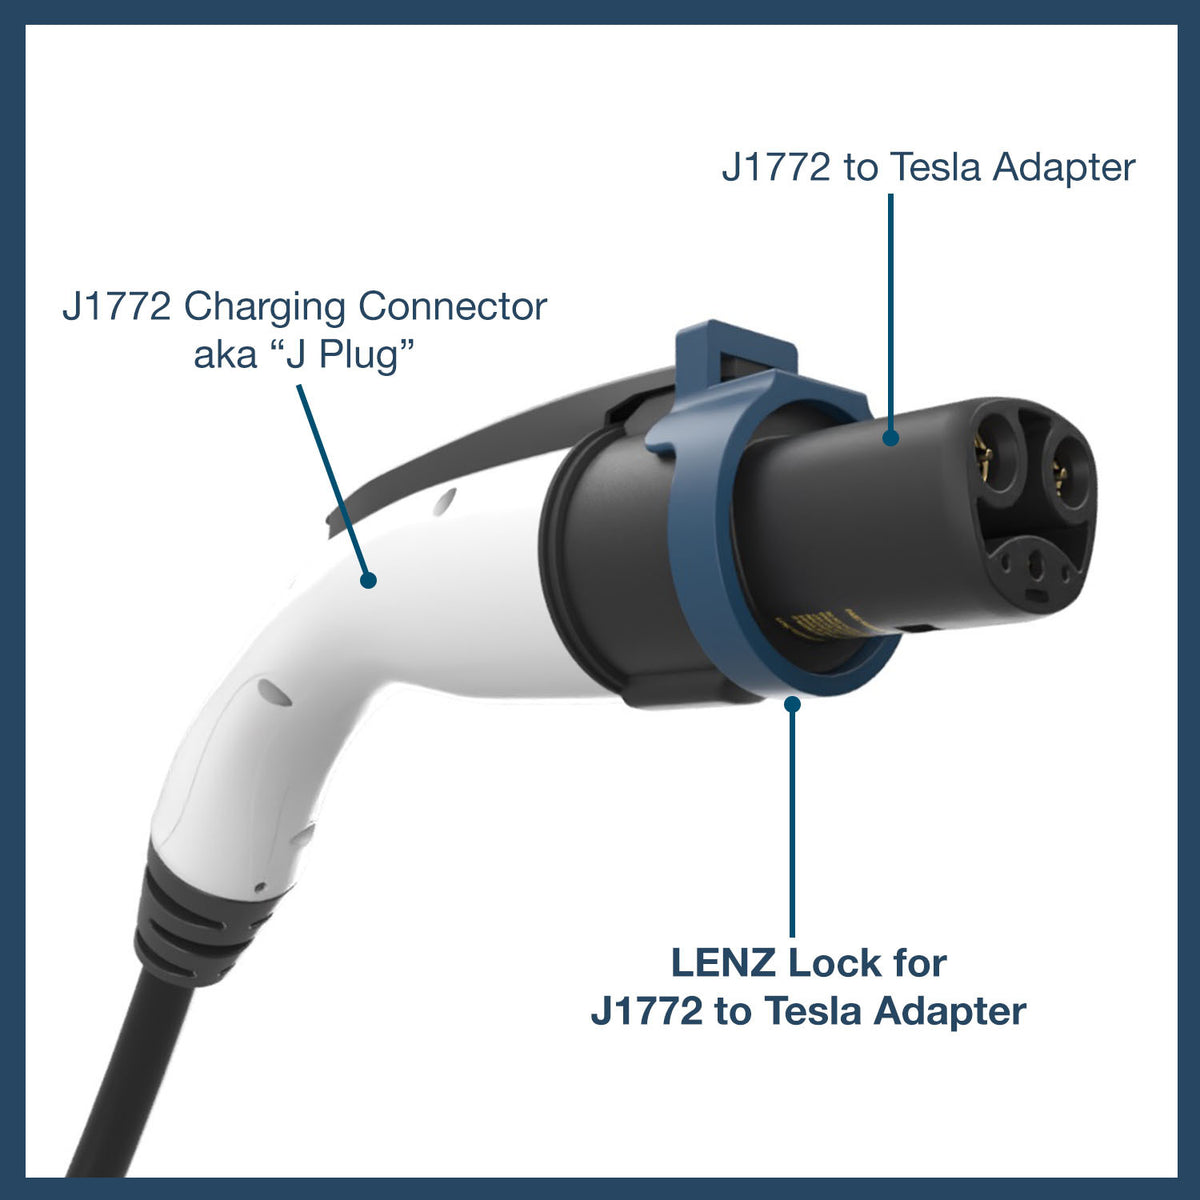 Charger Lock Compatible with J1772 to Tesla Charging Adapter